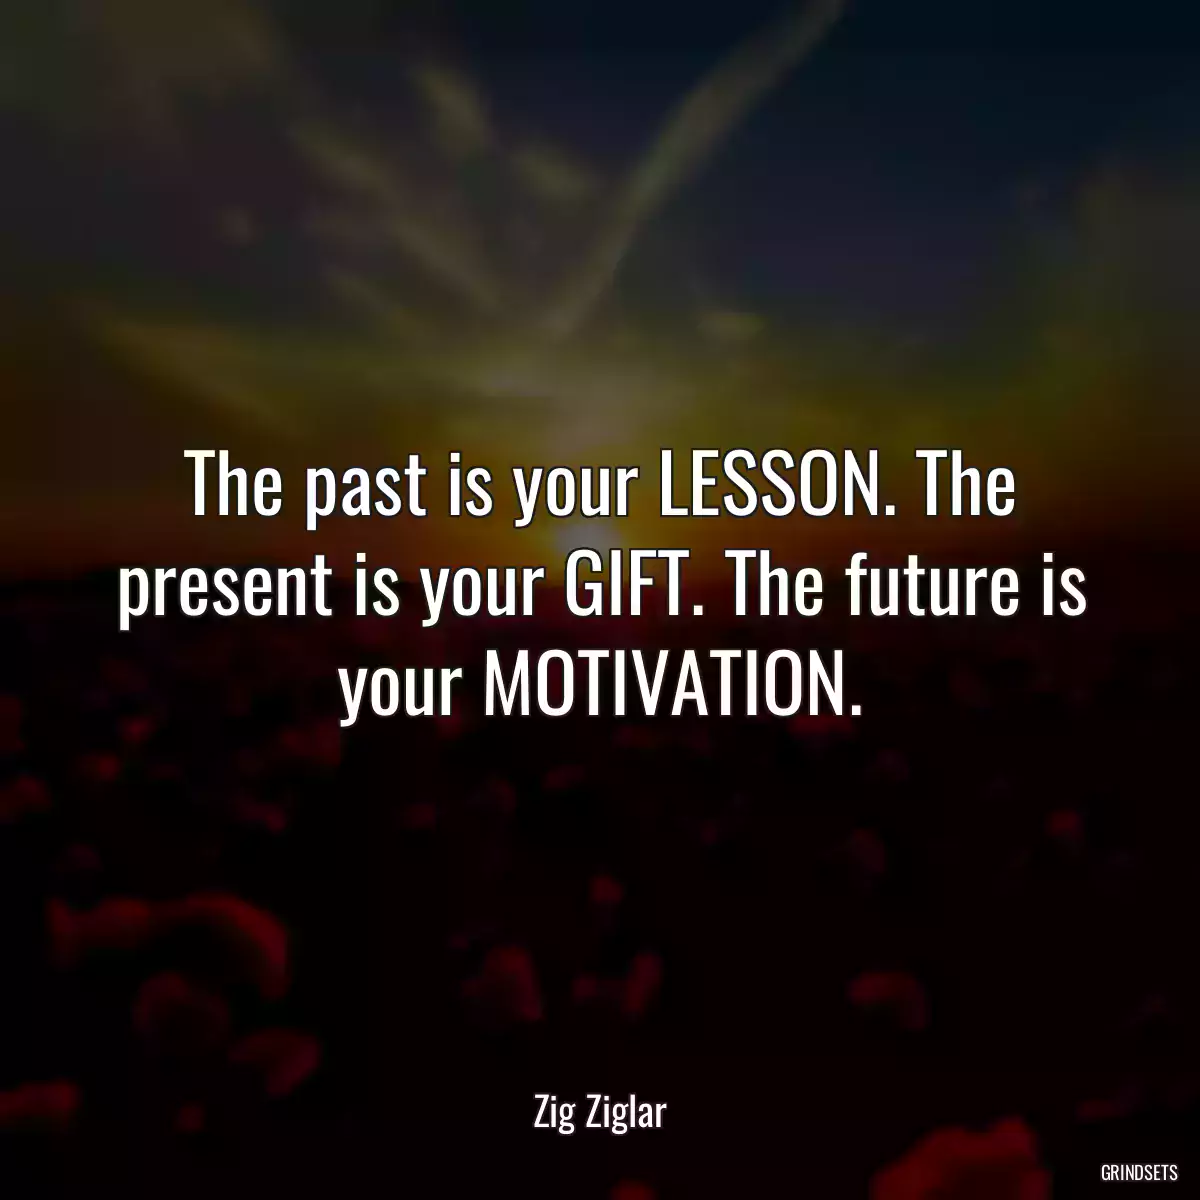 The past is your LESSON. The present is your GIFT. The future is your MOTIVATION.